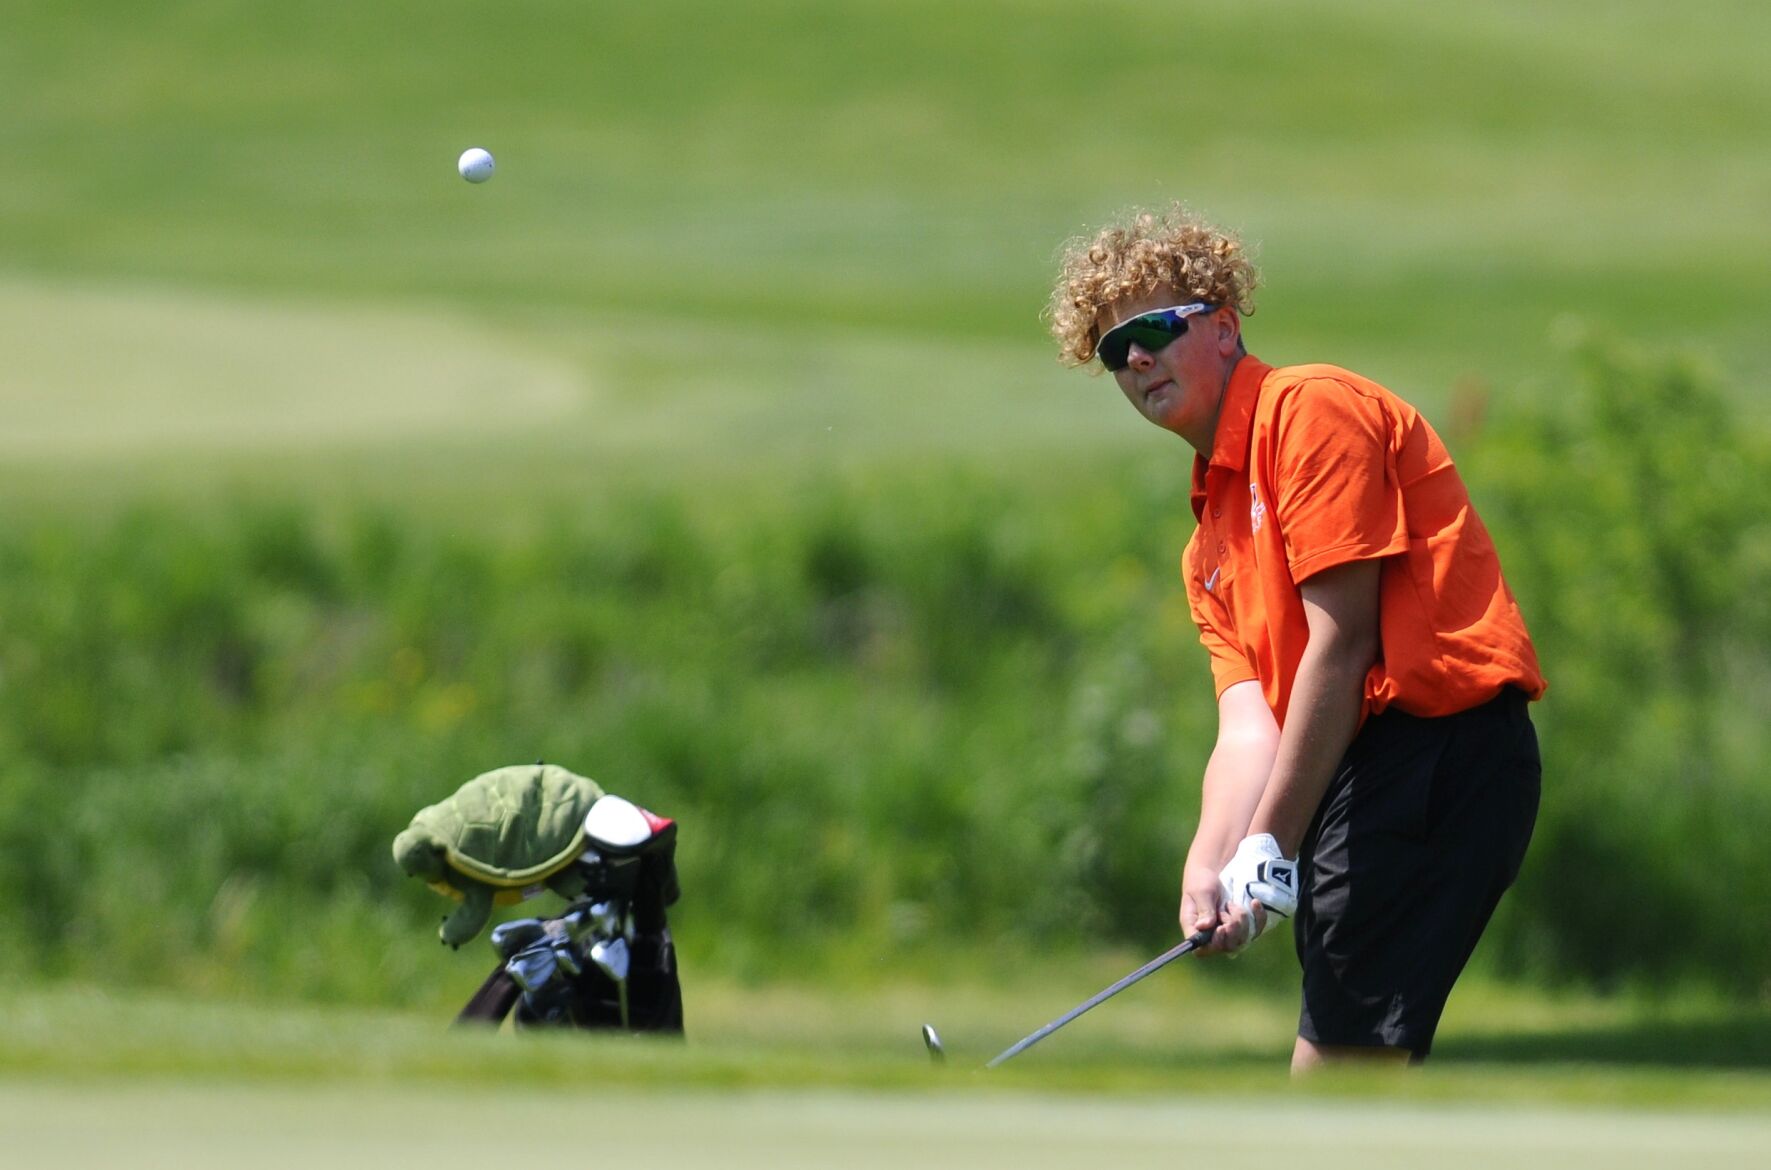 Norris Dominates B-3 District Golf Tournament with Rich Talent and Championship Victory